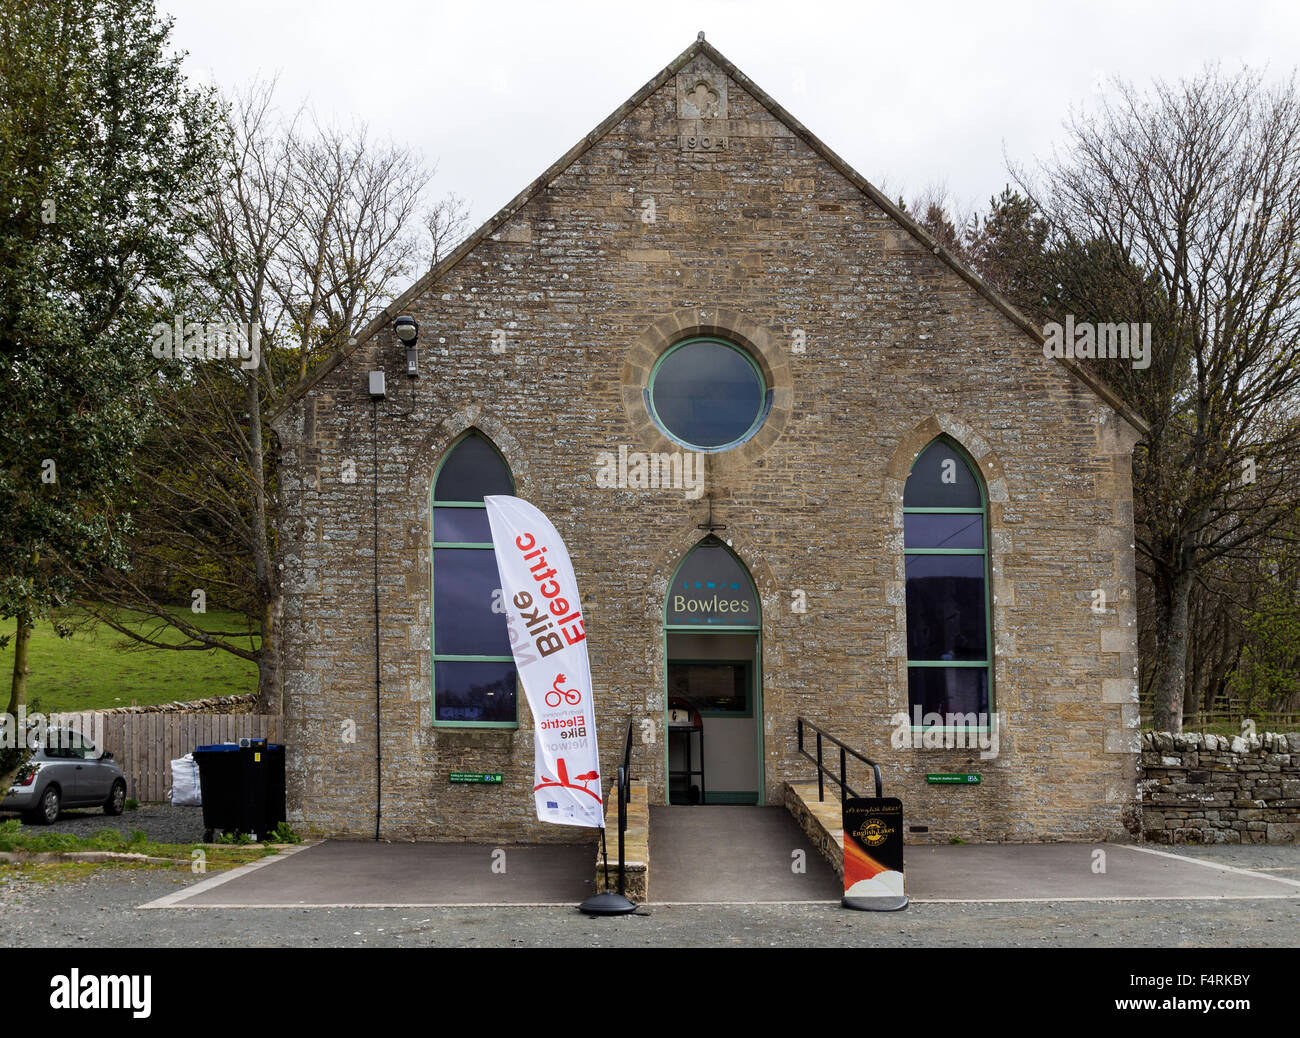 Bicicletta elettrica Network Sign a firmare Bowlees Visitor Center Teesdale North Pennines County Durham Regno Unito Foto Stock